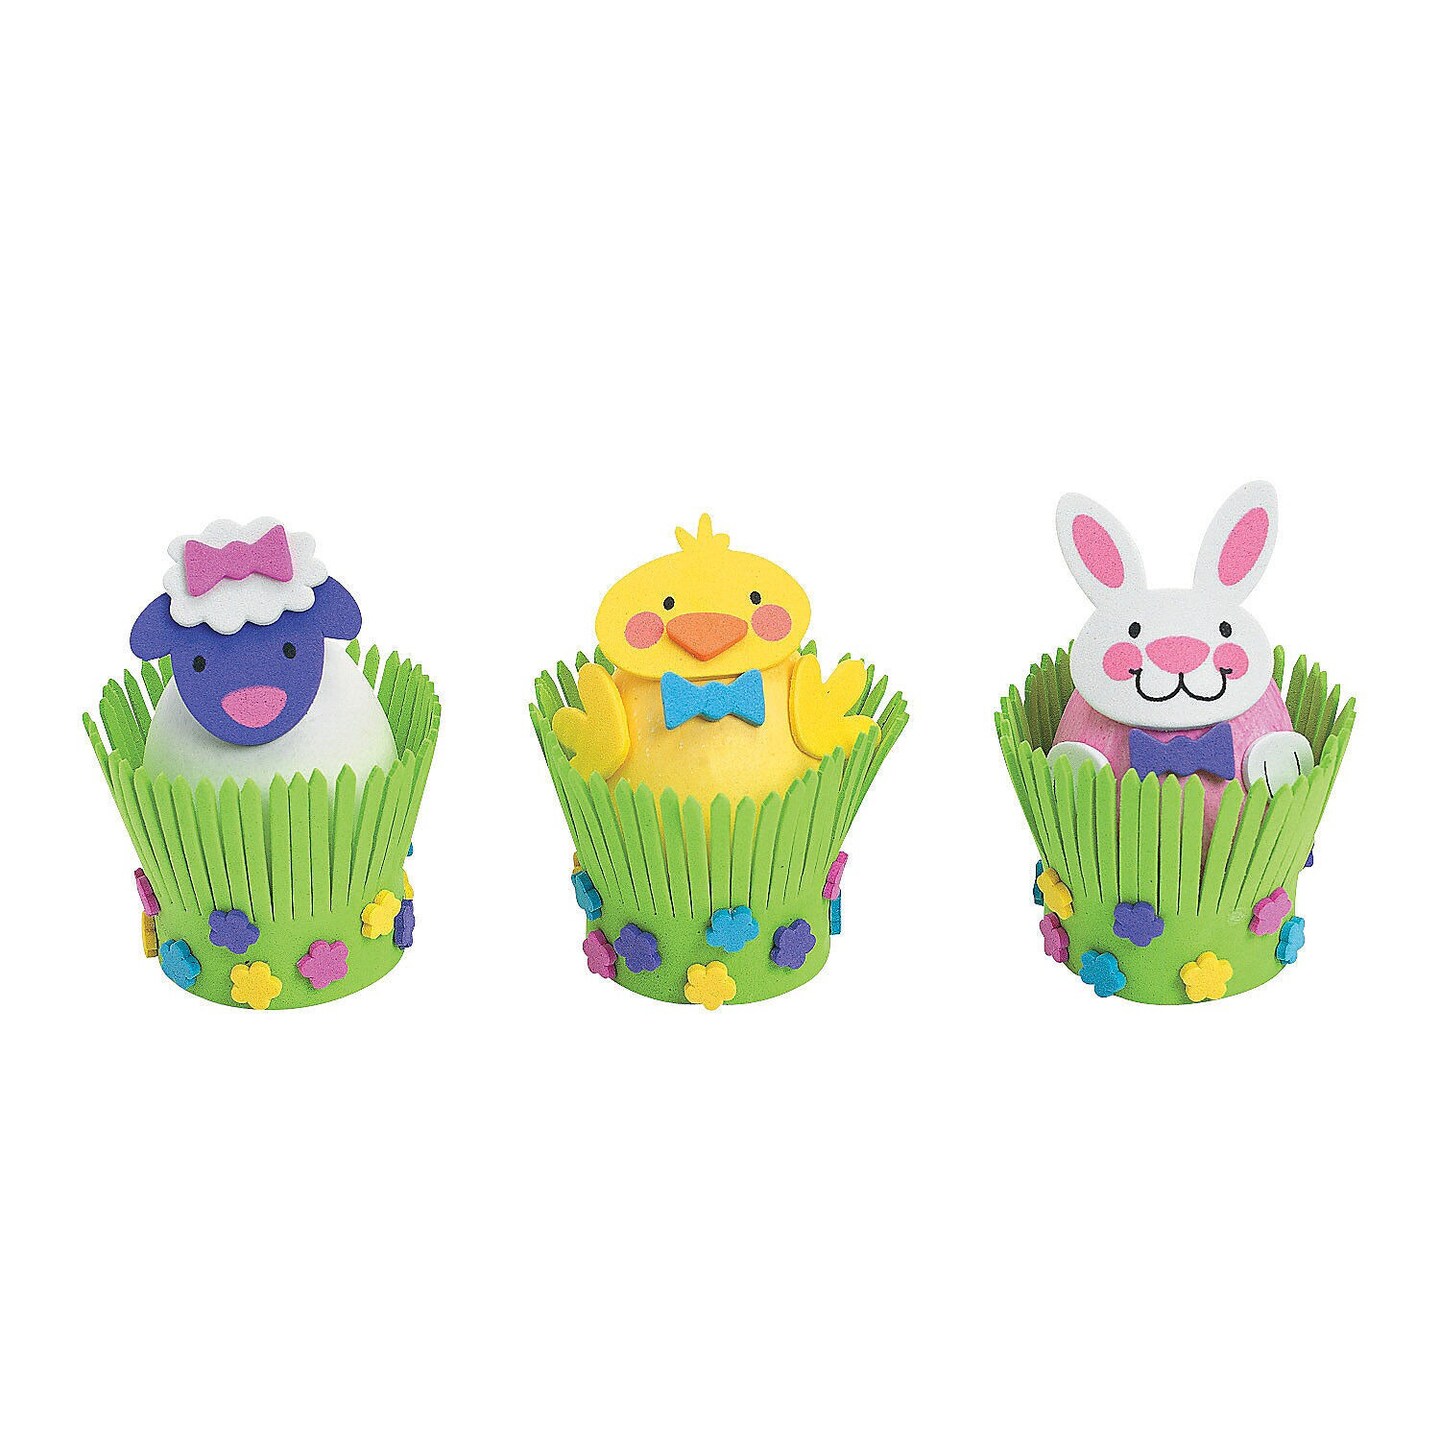 Easter Egg Decorations Craft Kit, Craft Kits, 12 Pieces